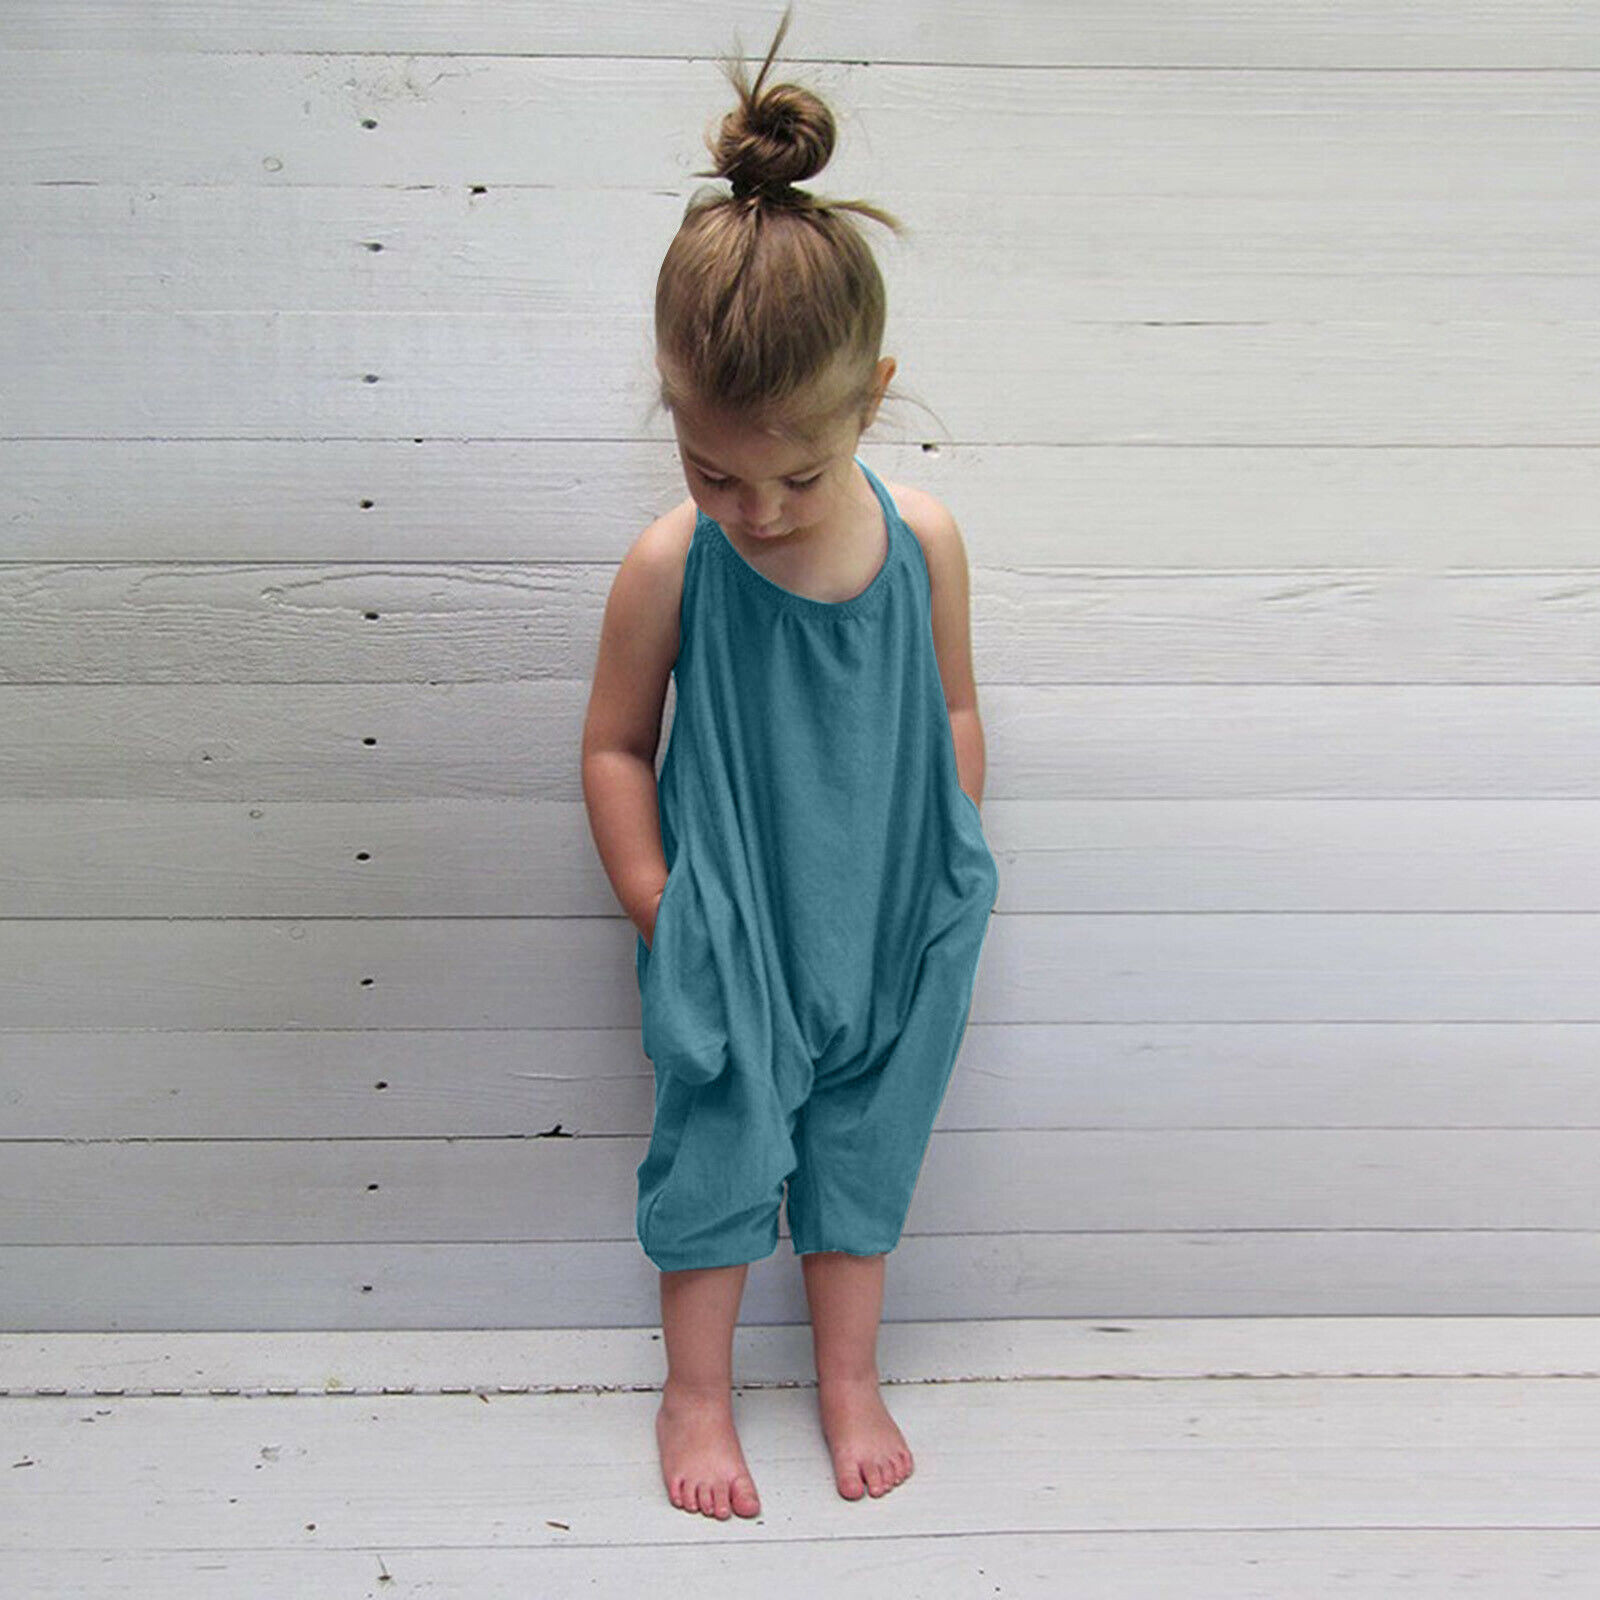 ZDFER Baby Jumpsuit with Pockets,Summer Casual Harem Rompers Kids One Piece Cute Strap Toddler Pants Backless Outfits 